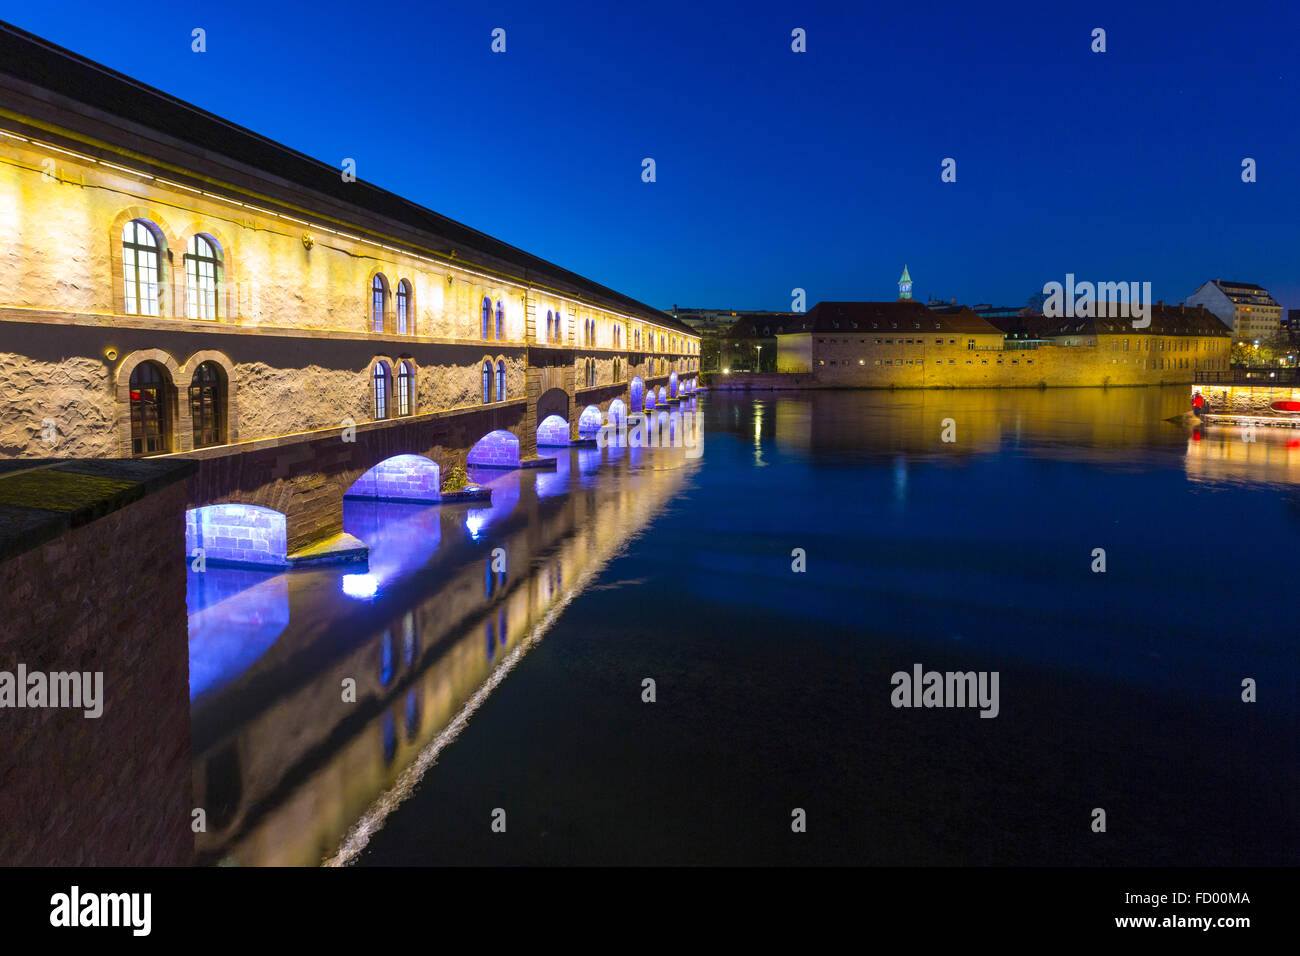 illumined Barrage Vauban at twilight reflected in the waters of the River Ill, Alsace France Stock Photo